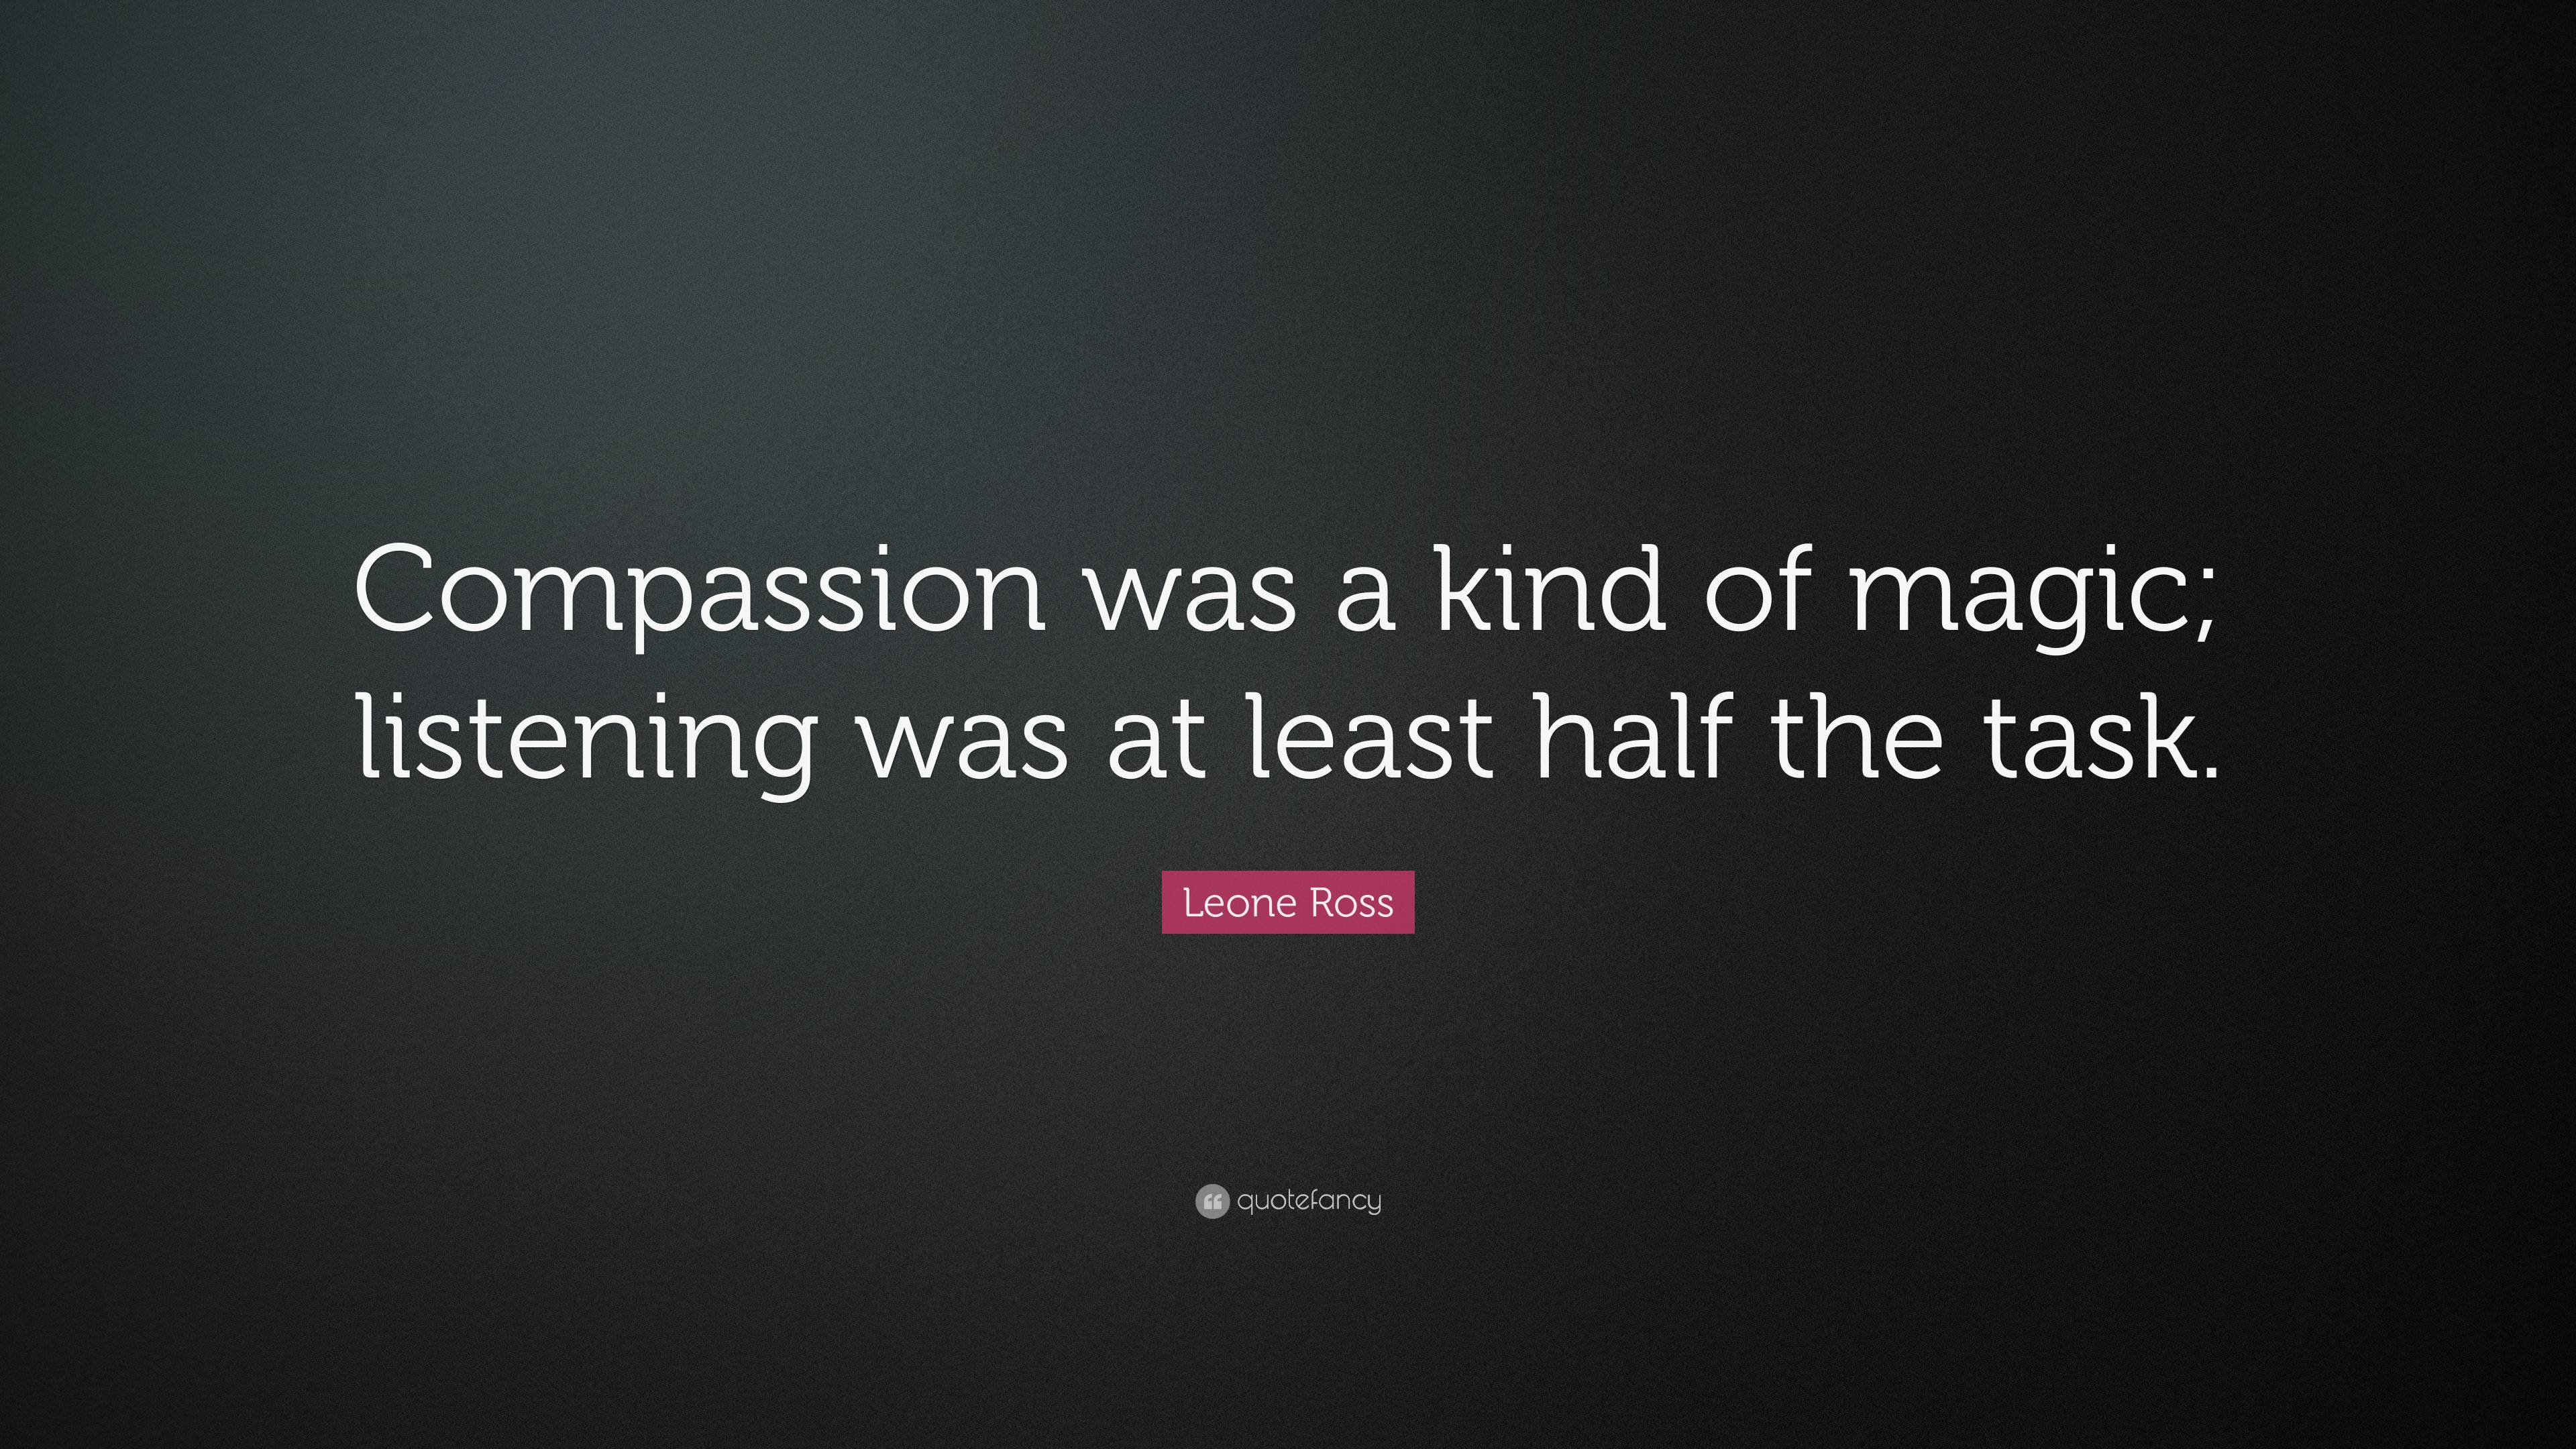 Leone Ross Quote: “Compassion was a kind of magic; listening was at ...